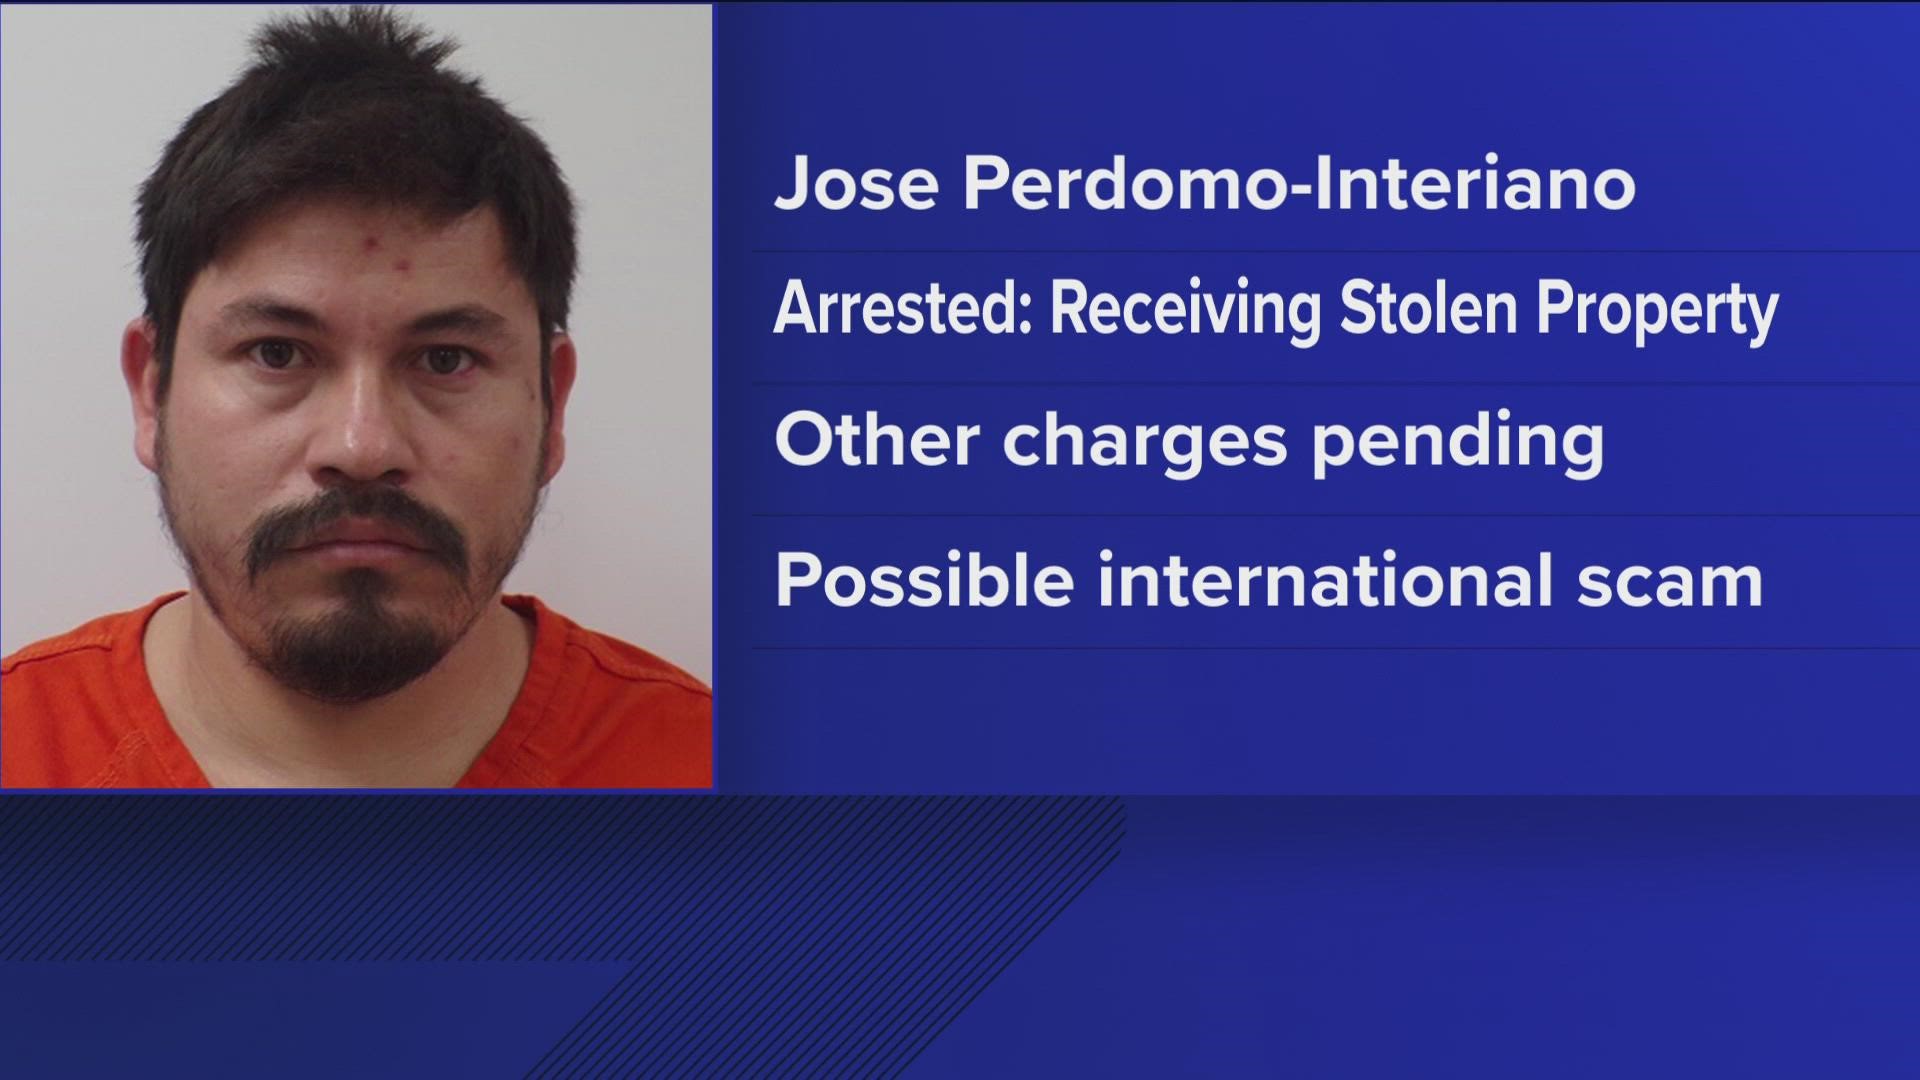 The Seneca Co. Sheriff's Office says 33-year-old Jose Perdomo-Interiano was attempting to make a large purchase with a stolen credit card in Republic on Thursday.